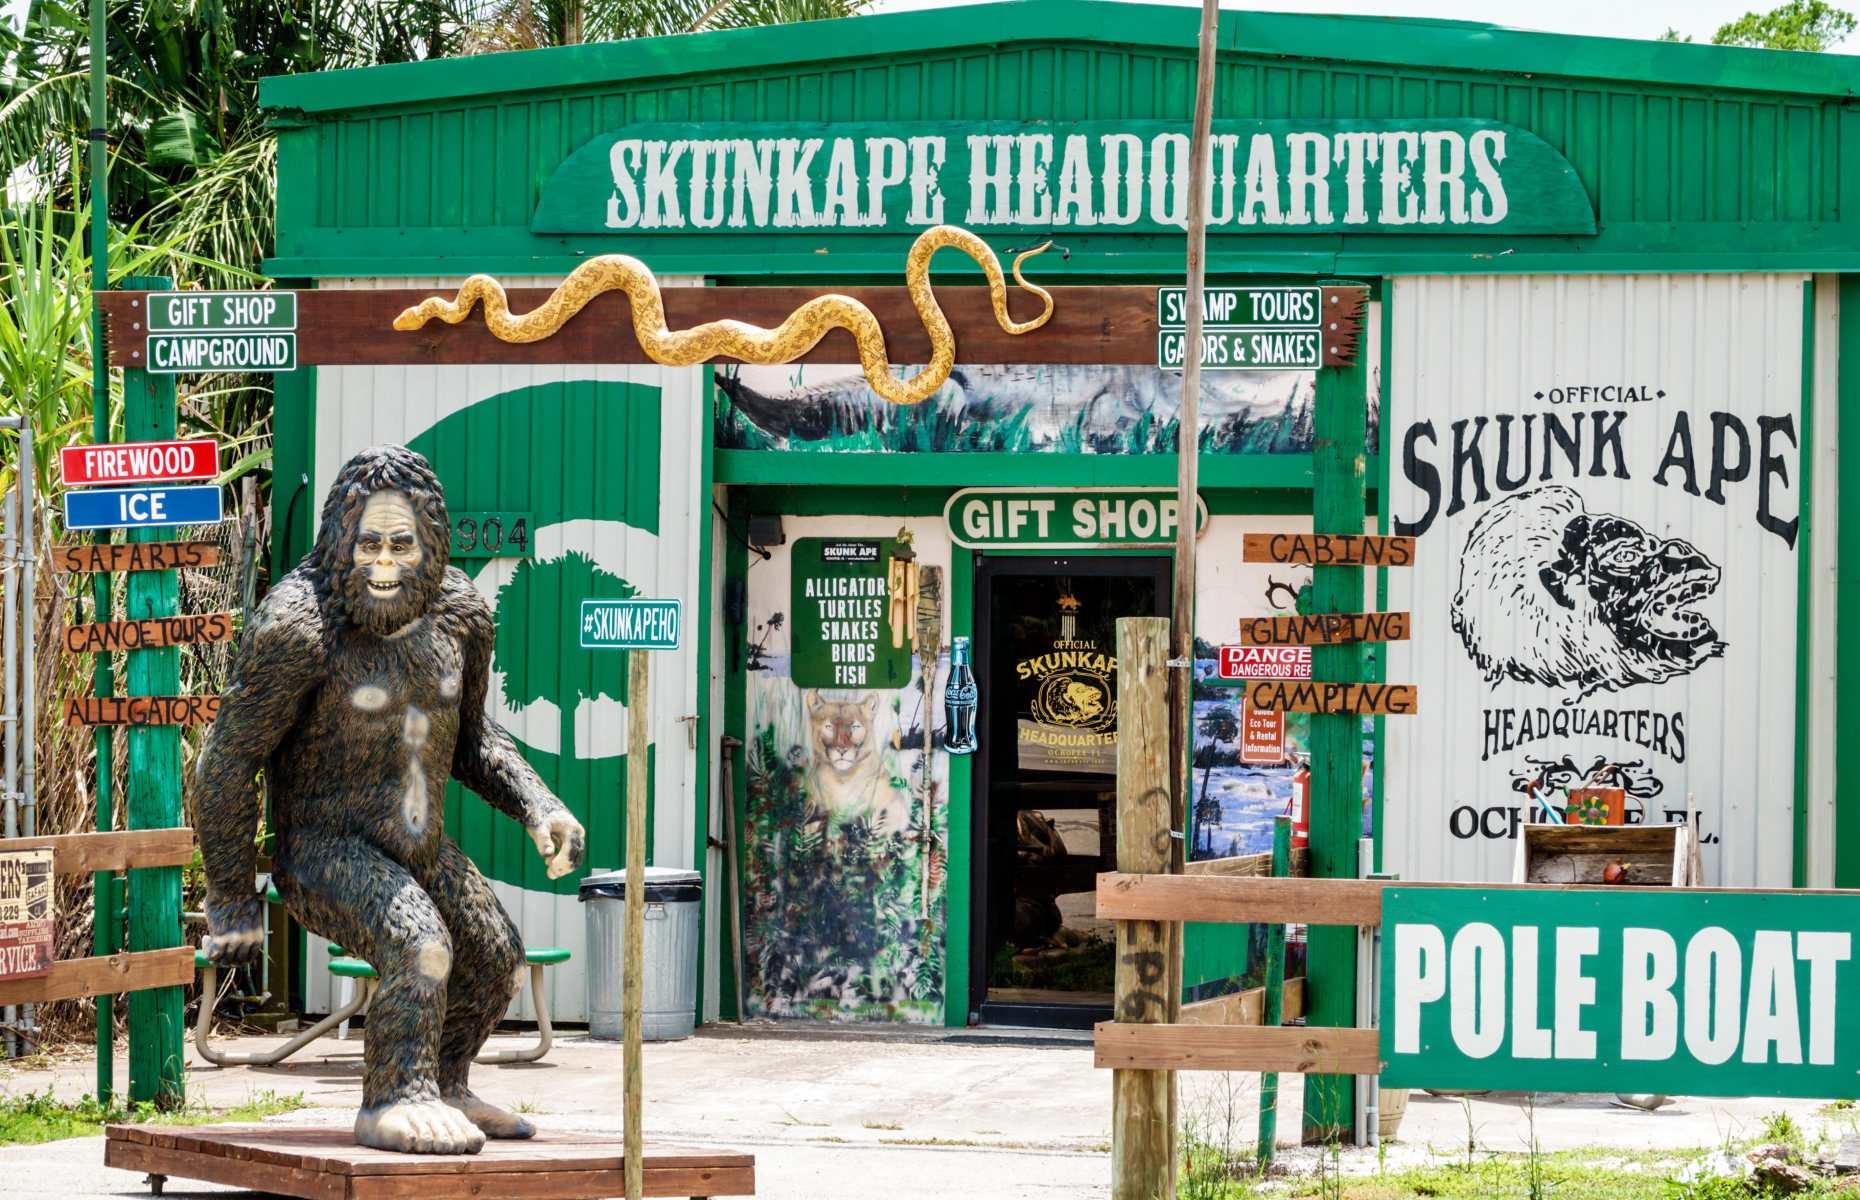 <p>Florida is no stranger to invasive species, but the so-called 'Skunk Ape' is strange even by state standards. This Swamp Sasquatch is an elusive creature, spotted in land that's now part of the Big Cypress National Preserve, 50 years ago by a man named Dave Shealy. Shealy has been hunting for the beast ever since, opening up the official Skunk Ape Research Headquarters near Naples. Aside from teaching you all about Florida's bigfoot, Shealy runs swamp tours and hosts live animal exhibits, including a 24-foot (7.3m) python.</p>